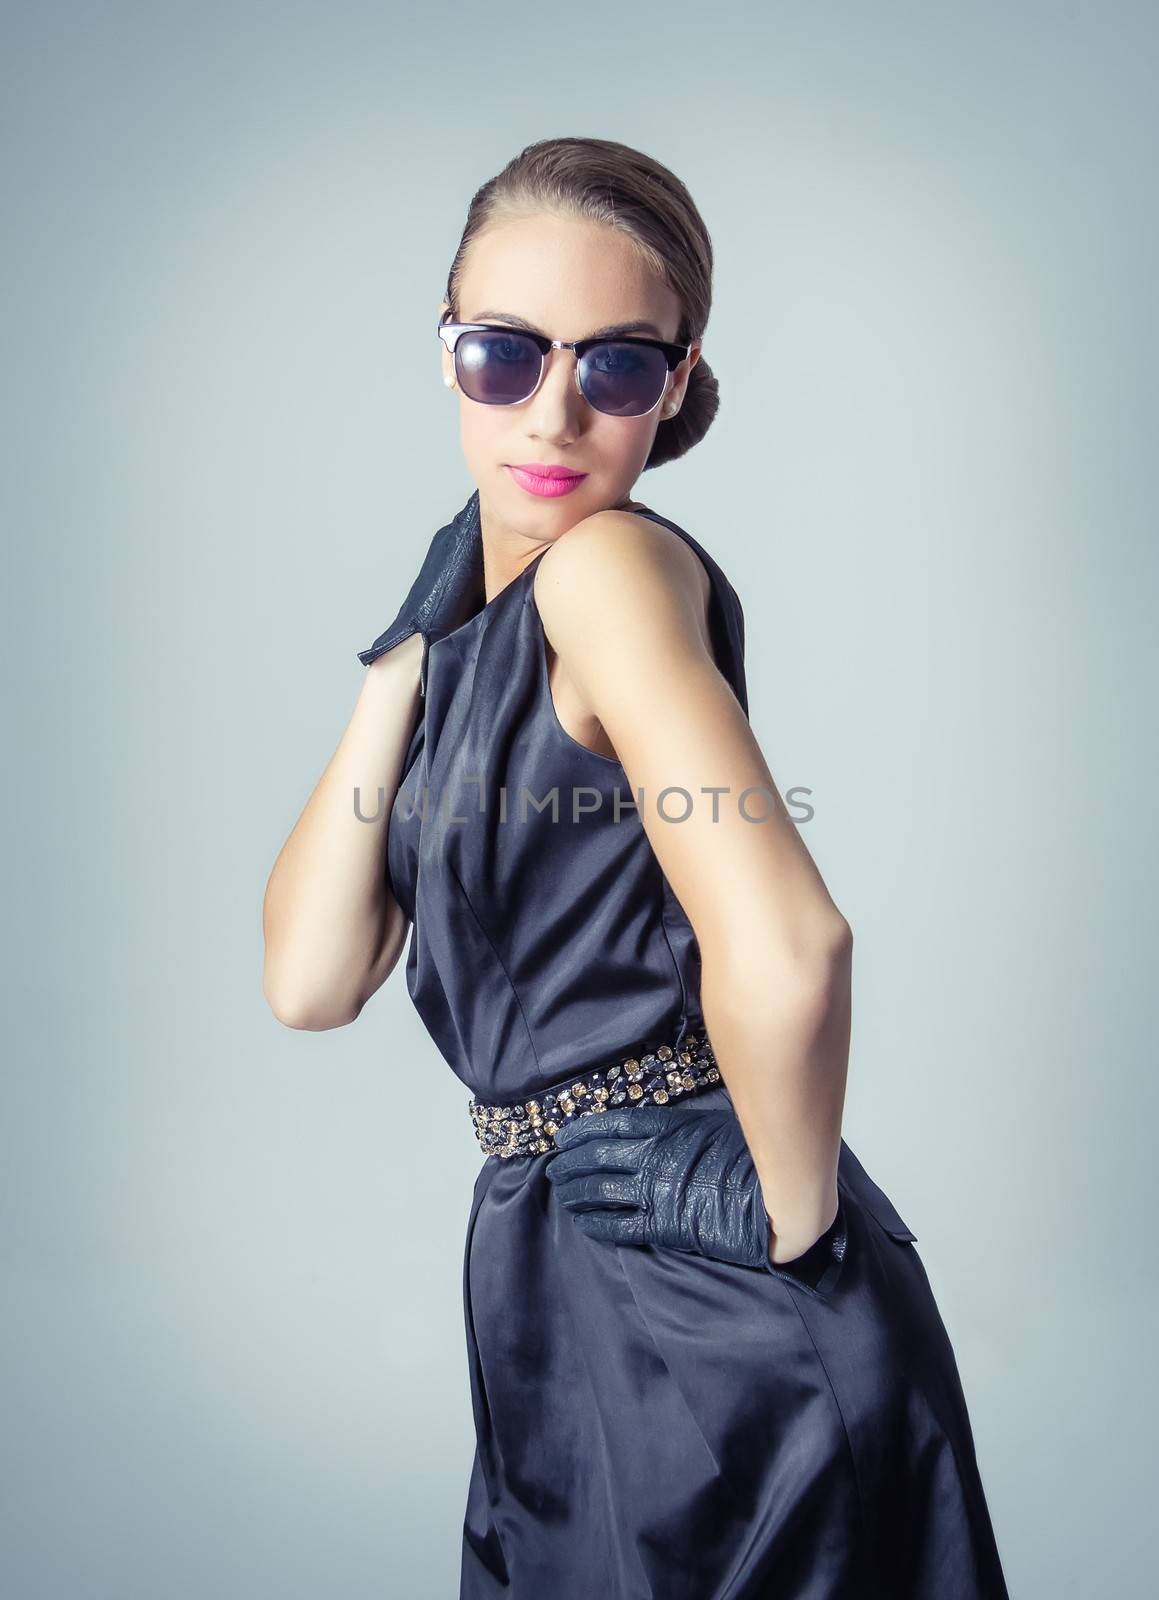 Vintage beautiful fashion girl with sunglasses by doble.d